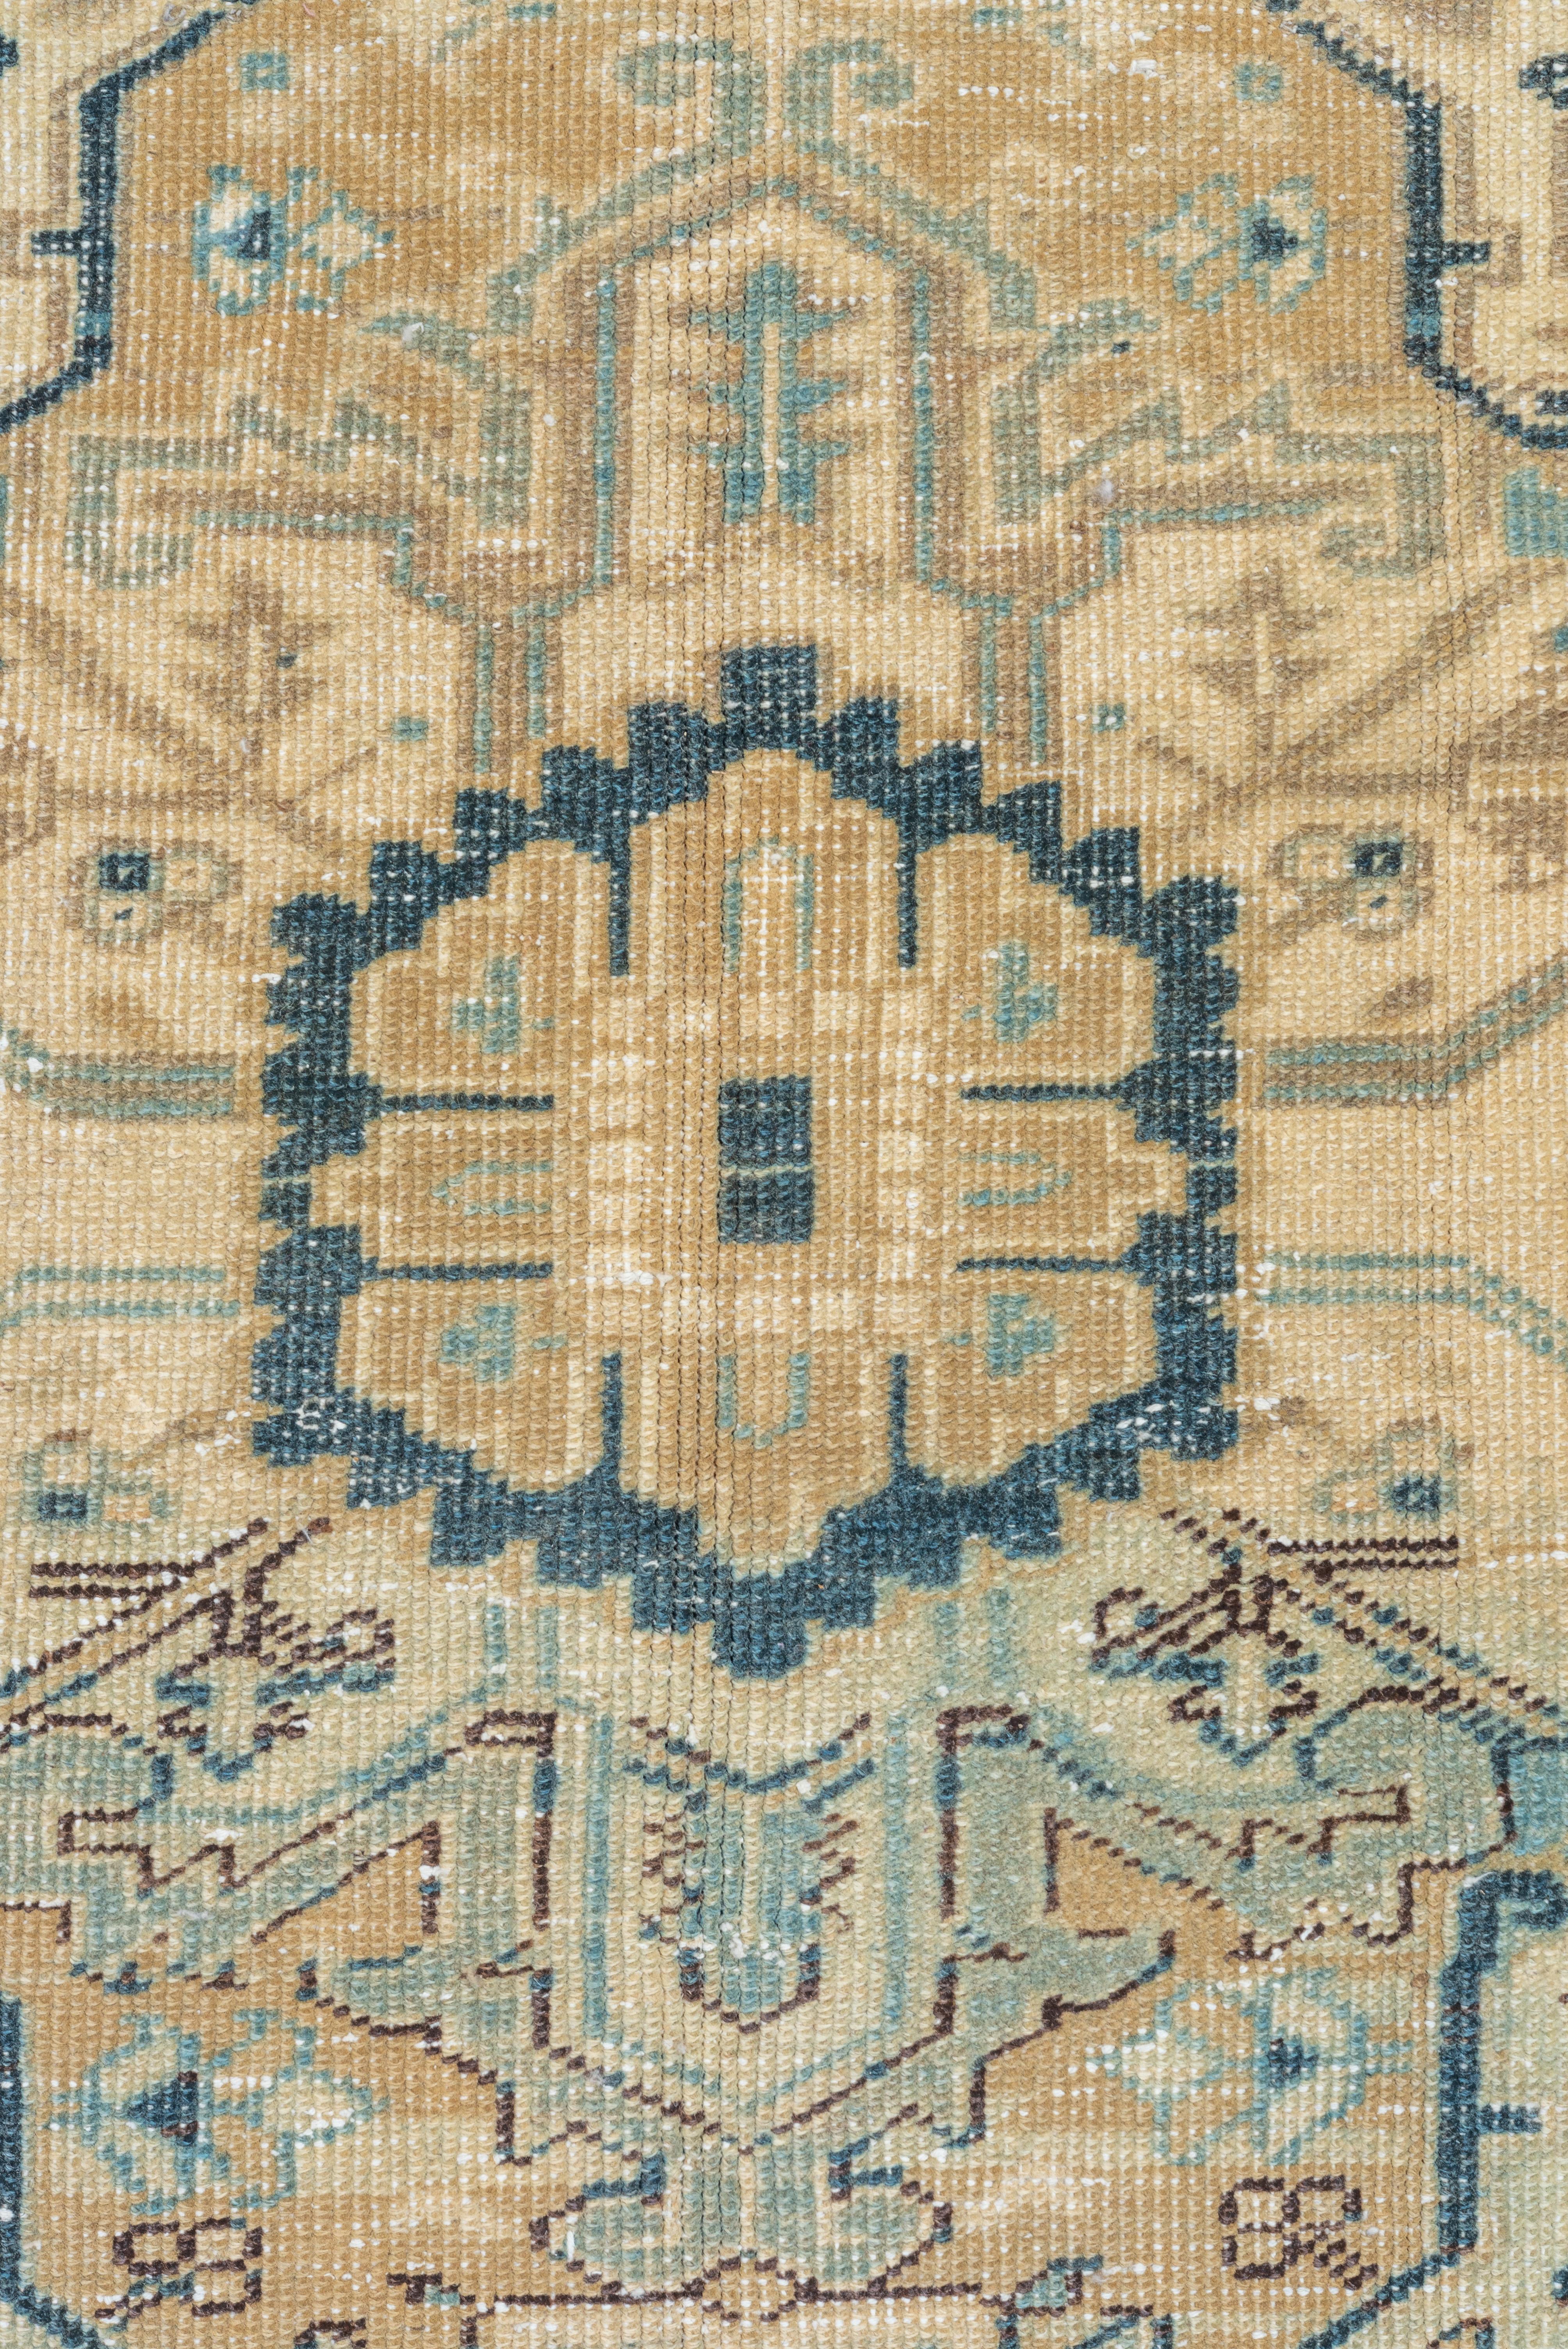 Persian Eliko Rugs by David Ariel Antique Heriz Rug, Teal Subfield, Center Medallion For Sale